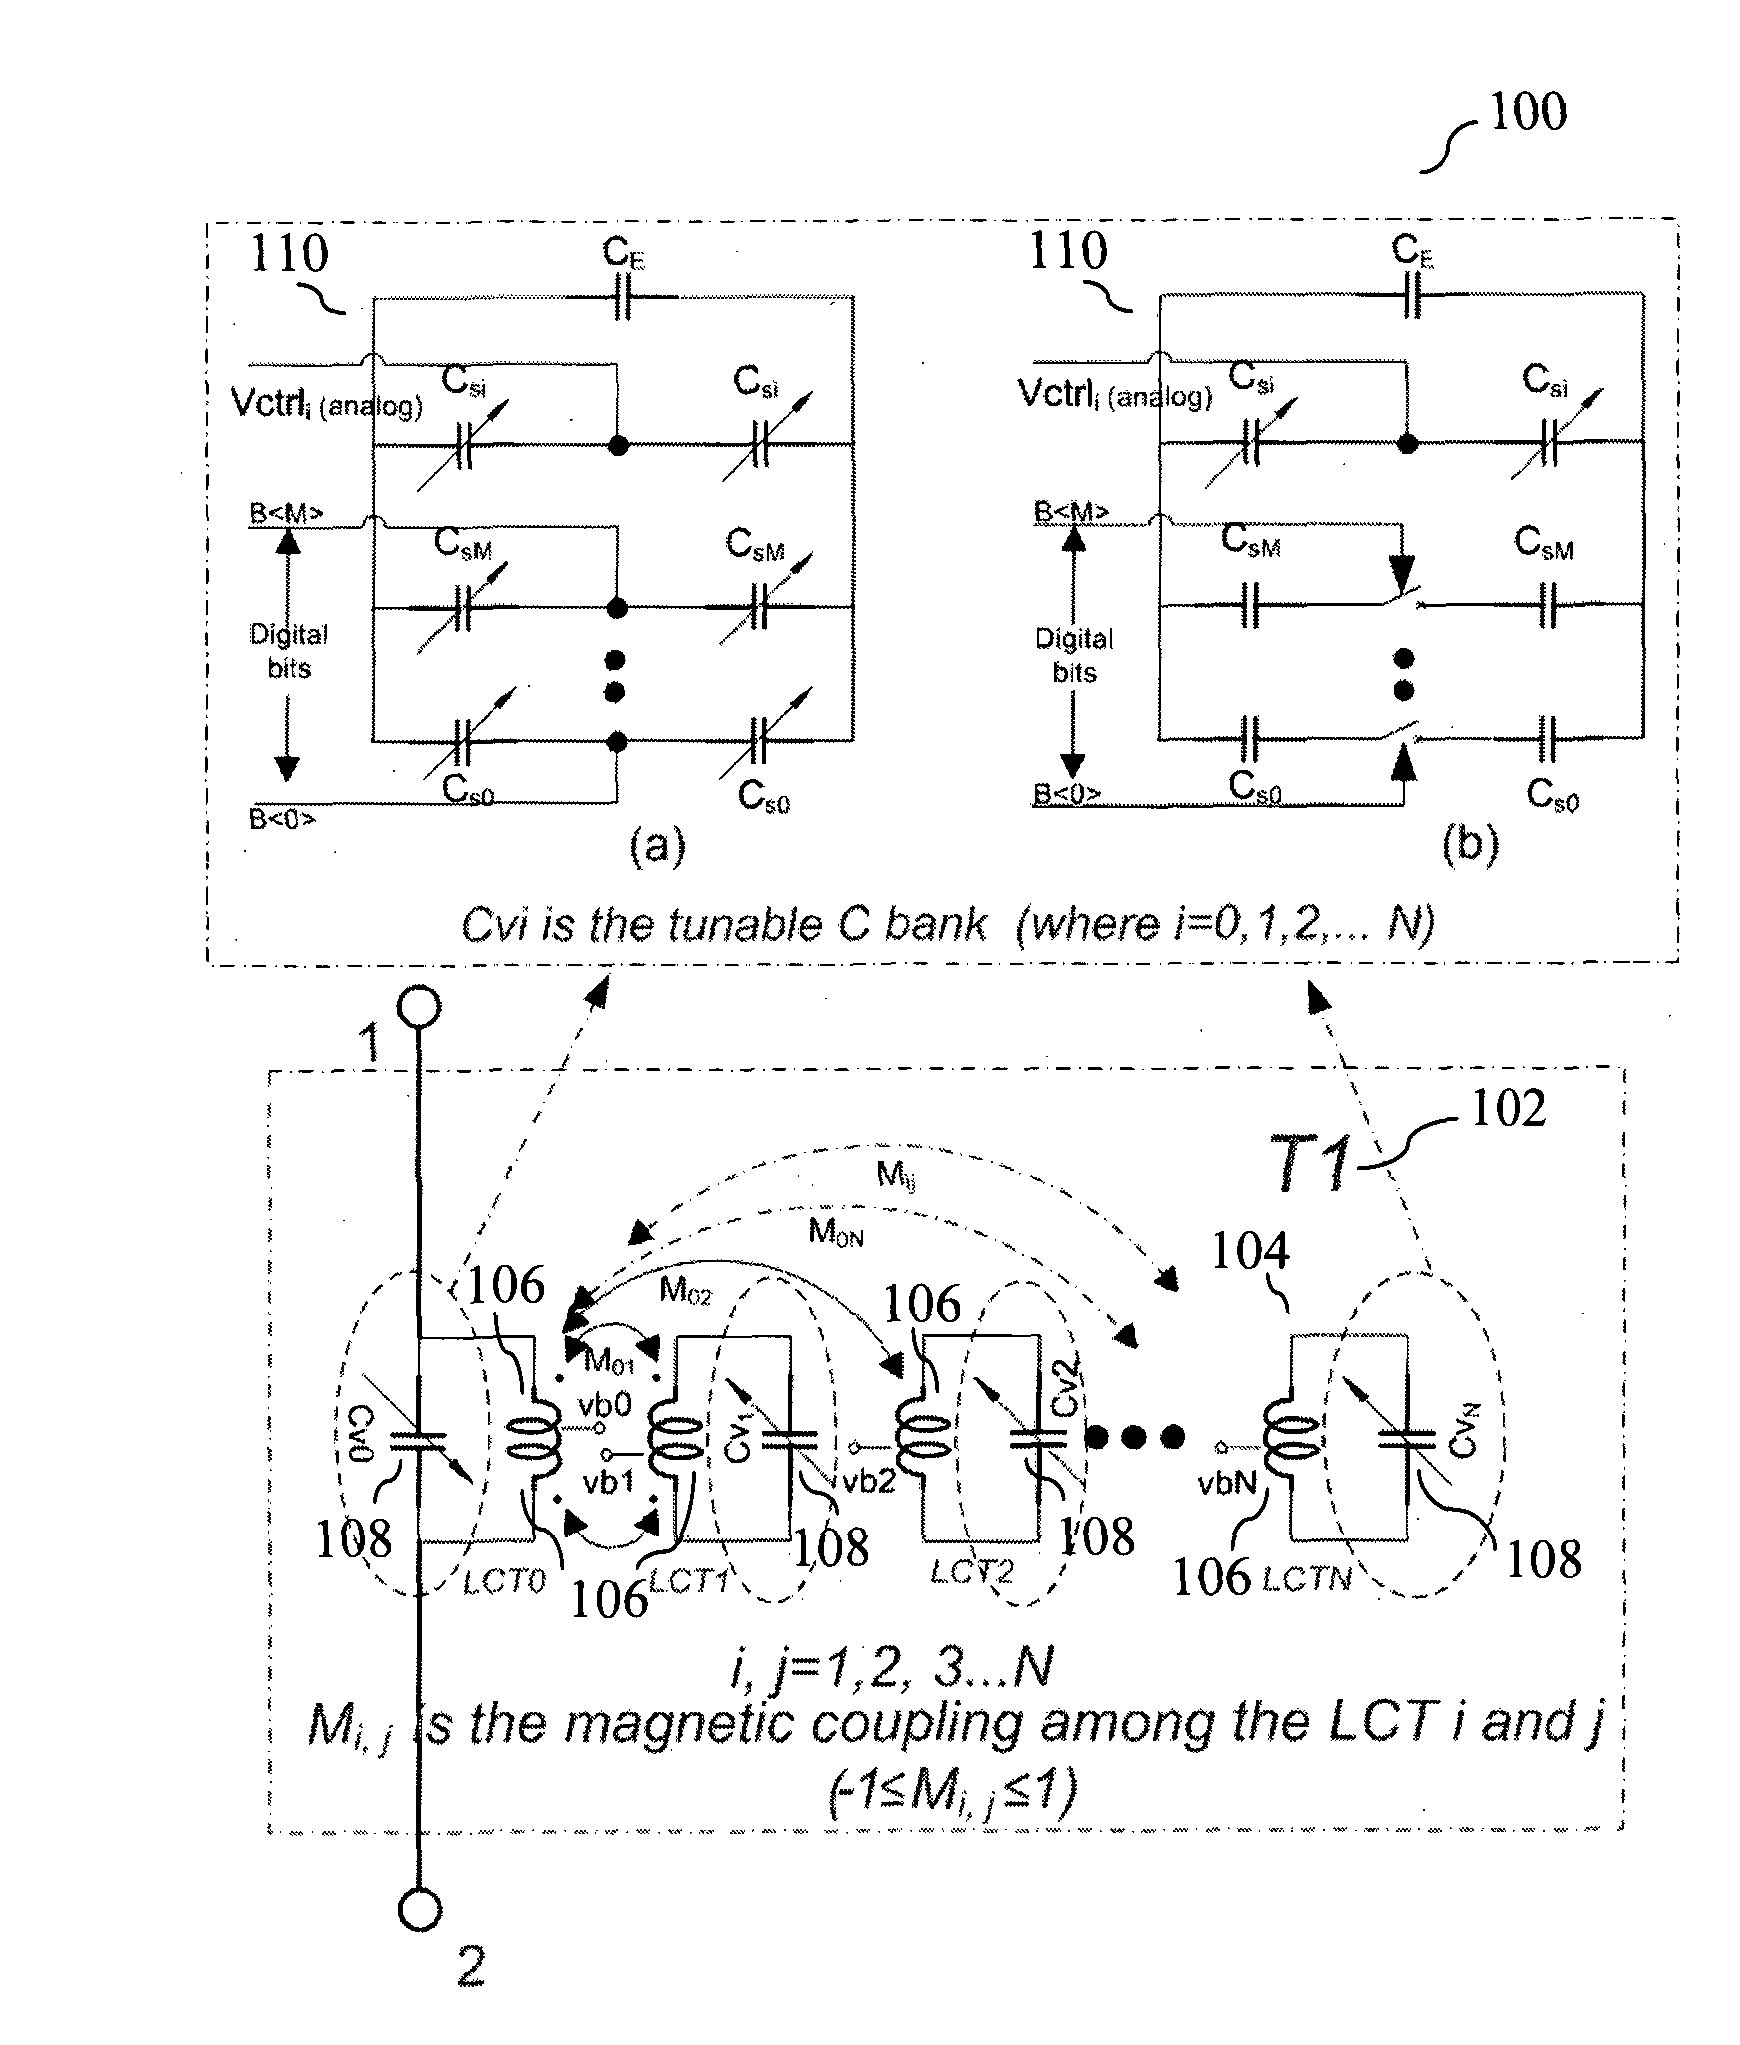 Integrated Circuit Architecture with Strongly Coupled LC Tanks